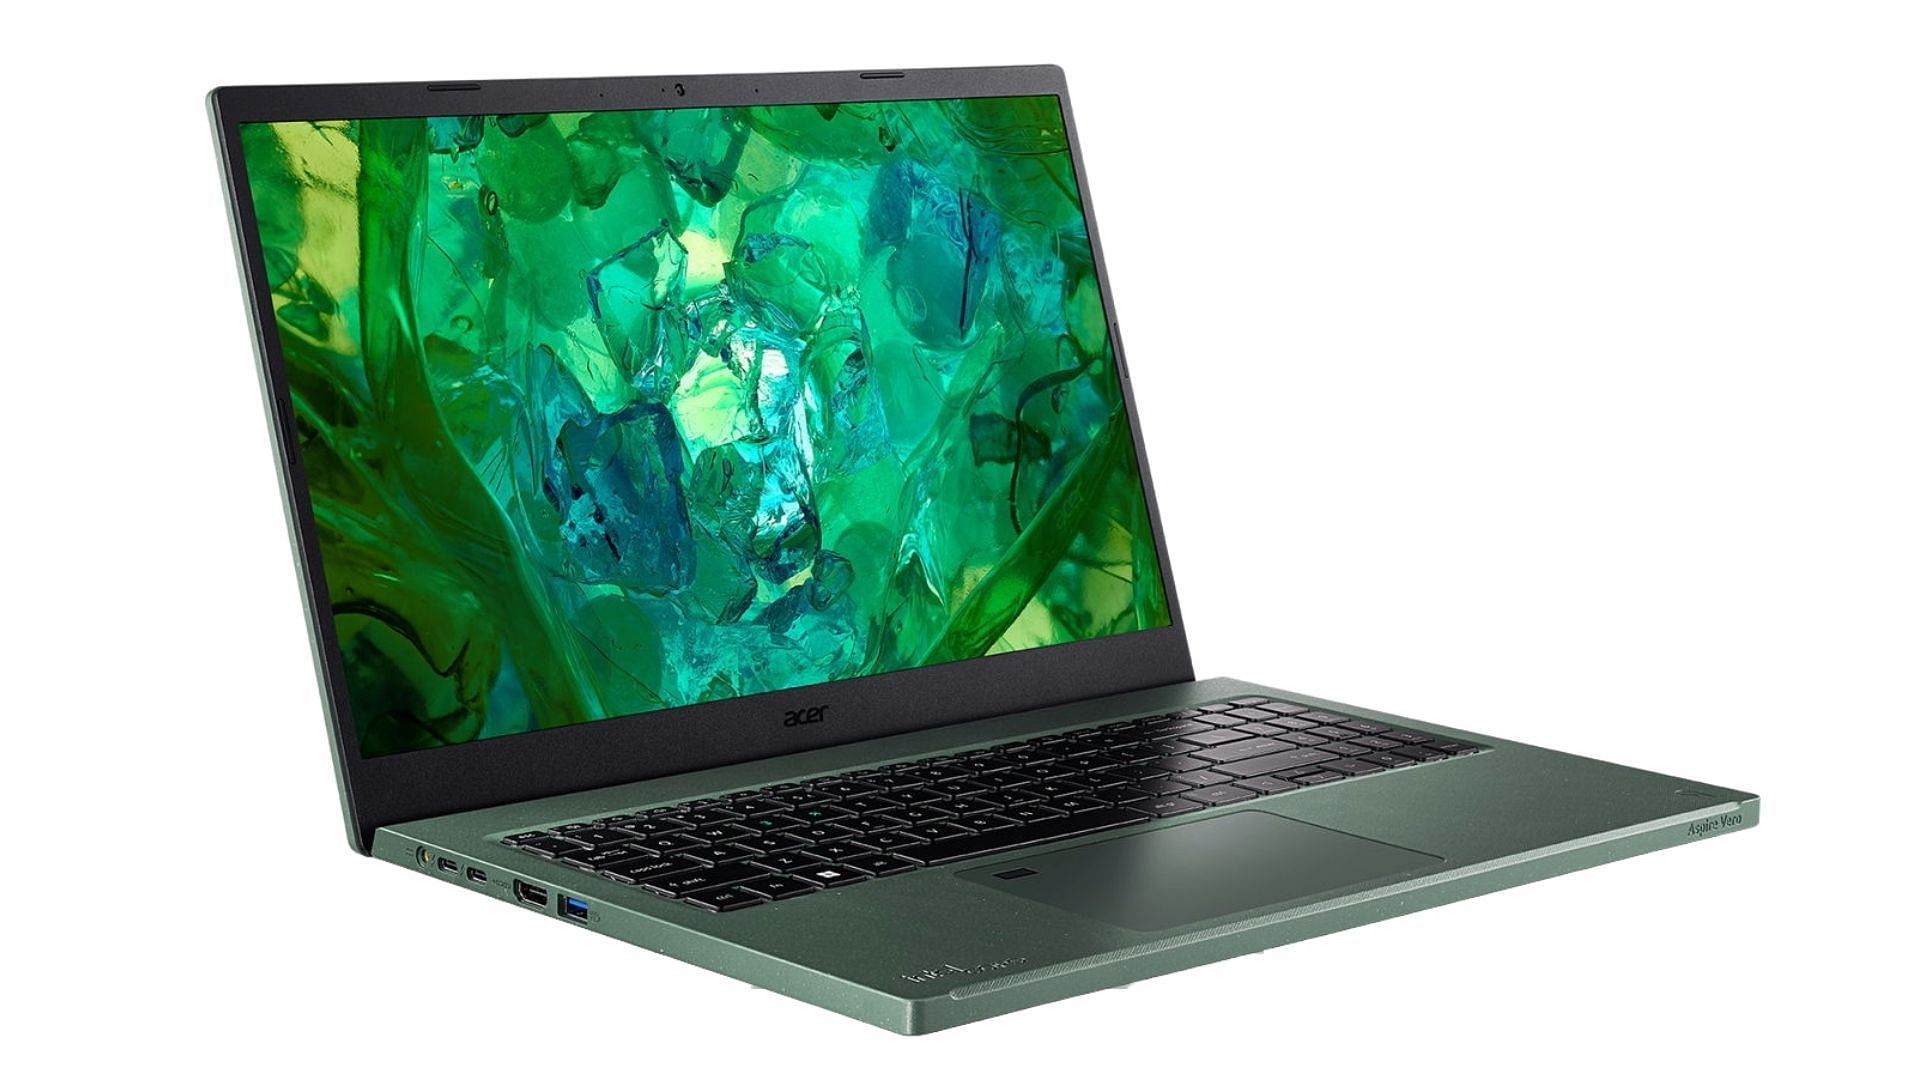 Acer Aspire Vero 15 is one of the best laptops with integrated graphics in mid-range (Image via Acer)